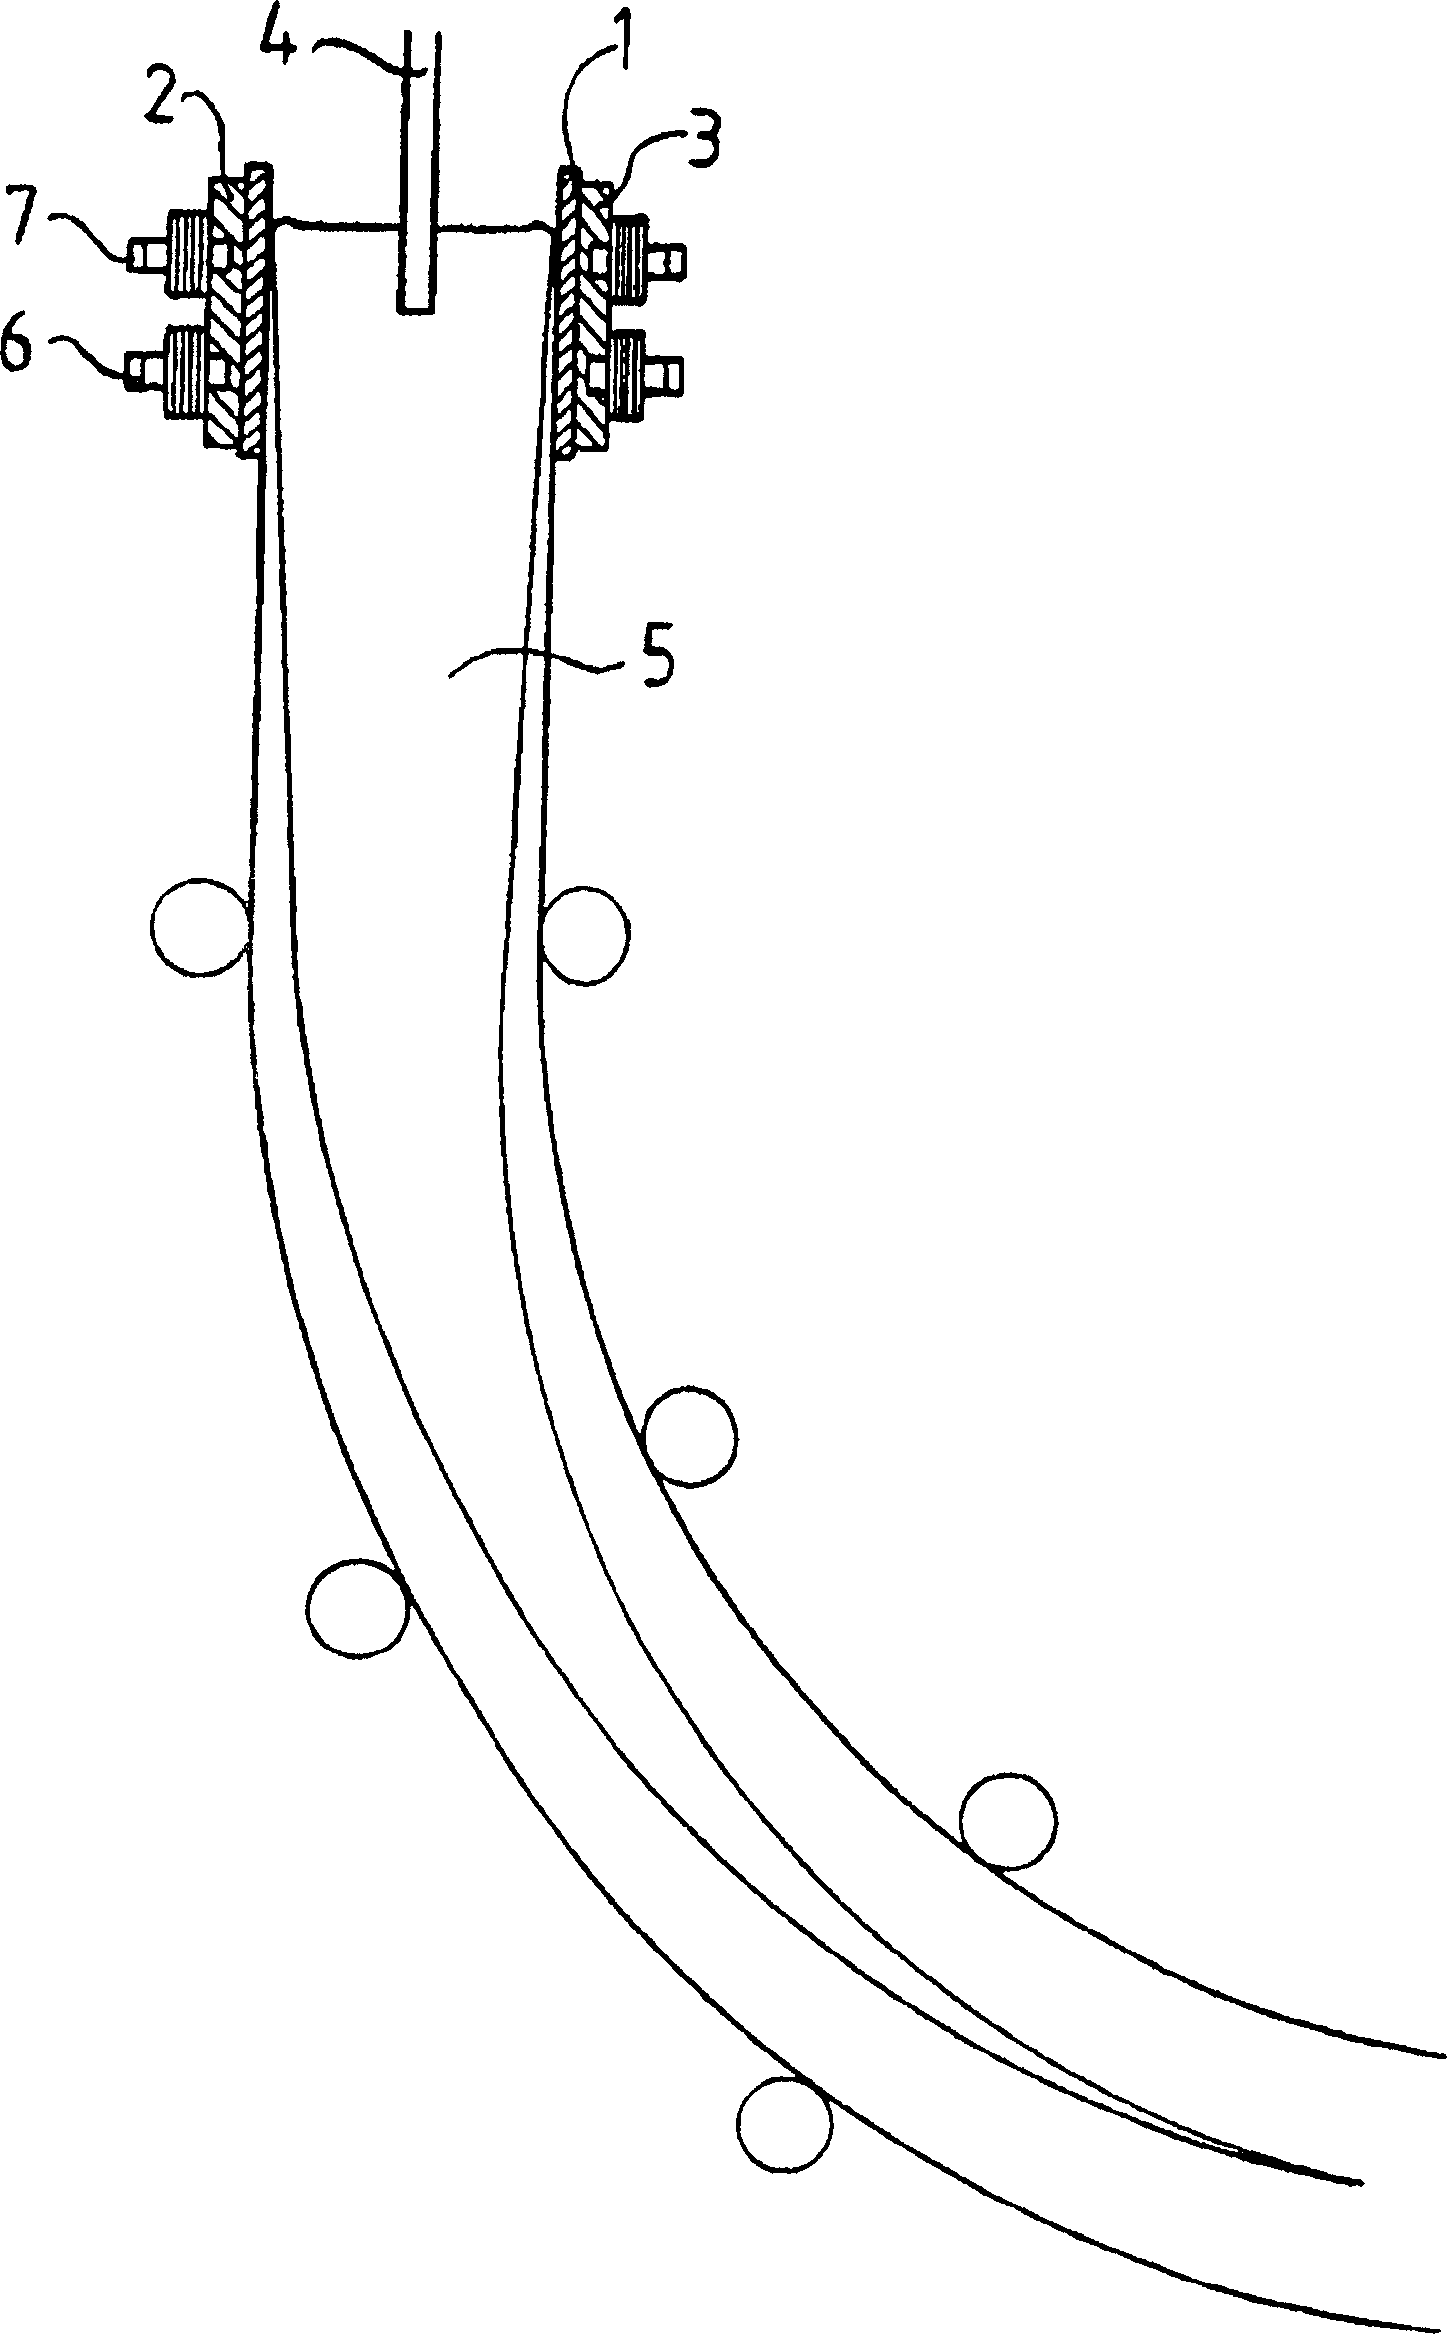 A method and device for continuous casting of metals